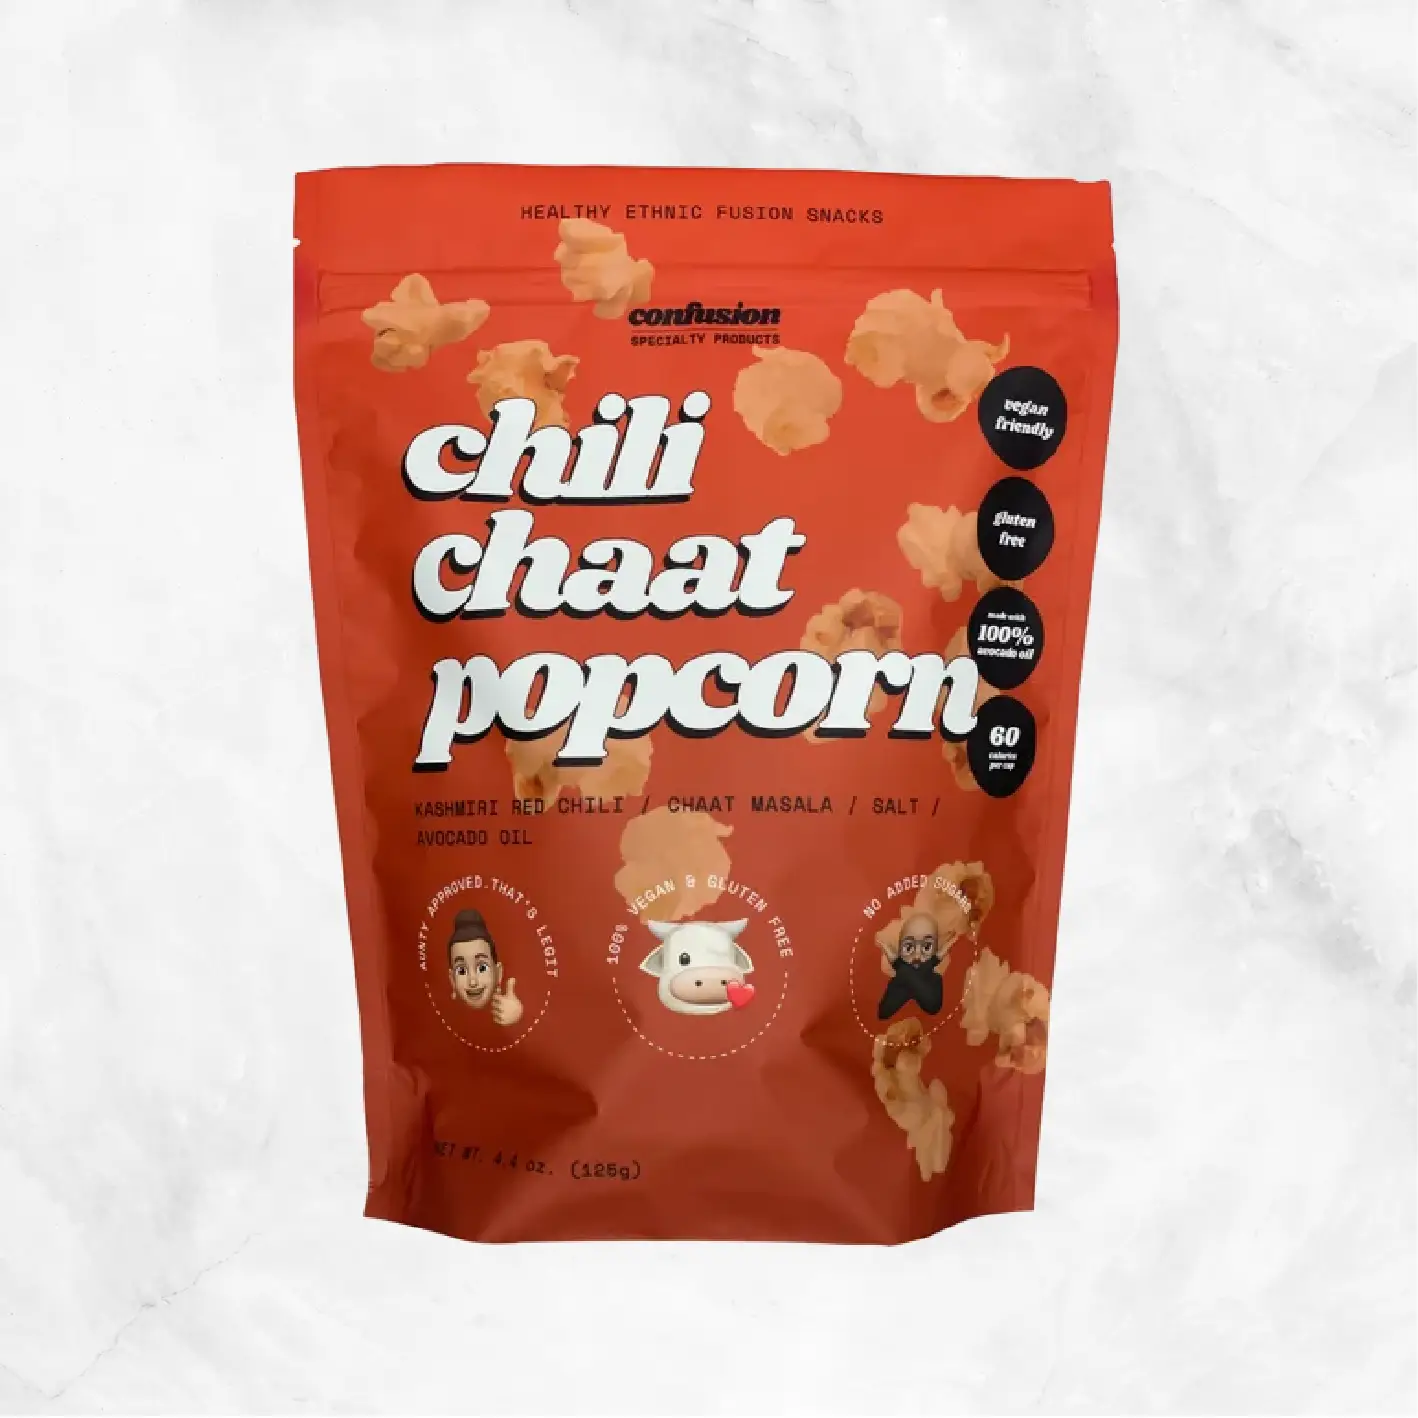 Chili Chaat Popcorn Delivery